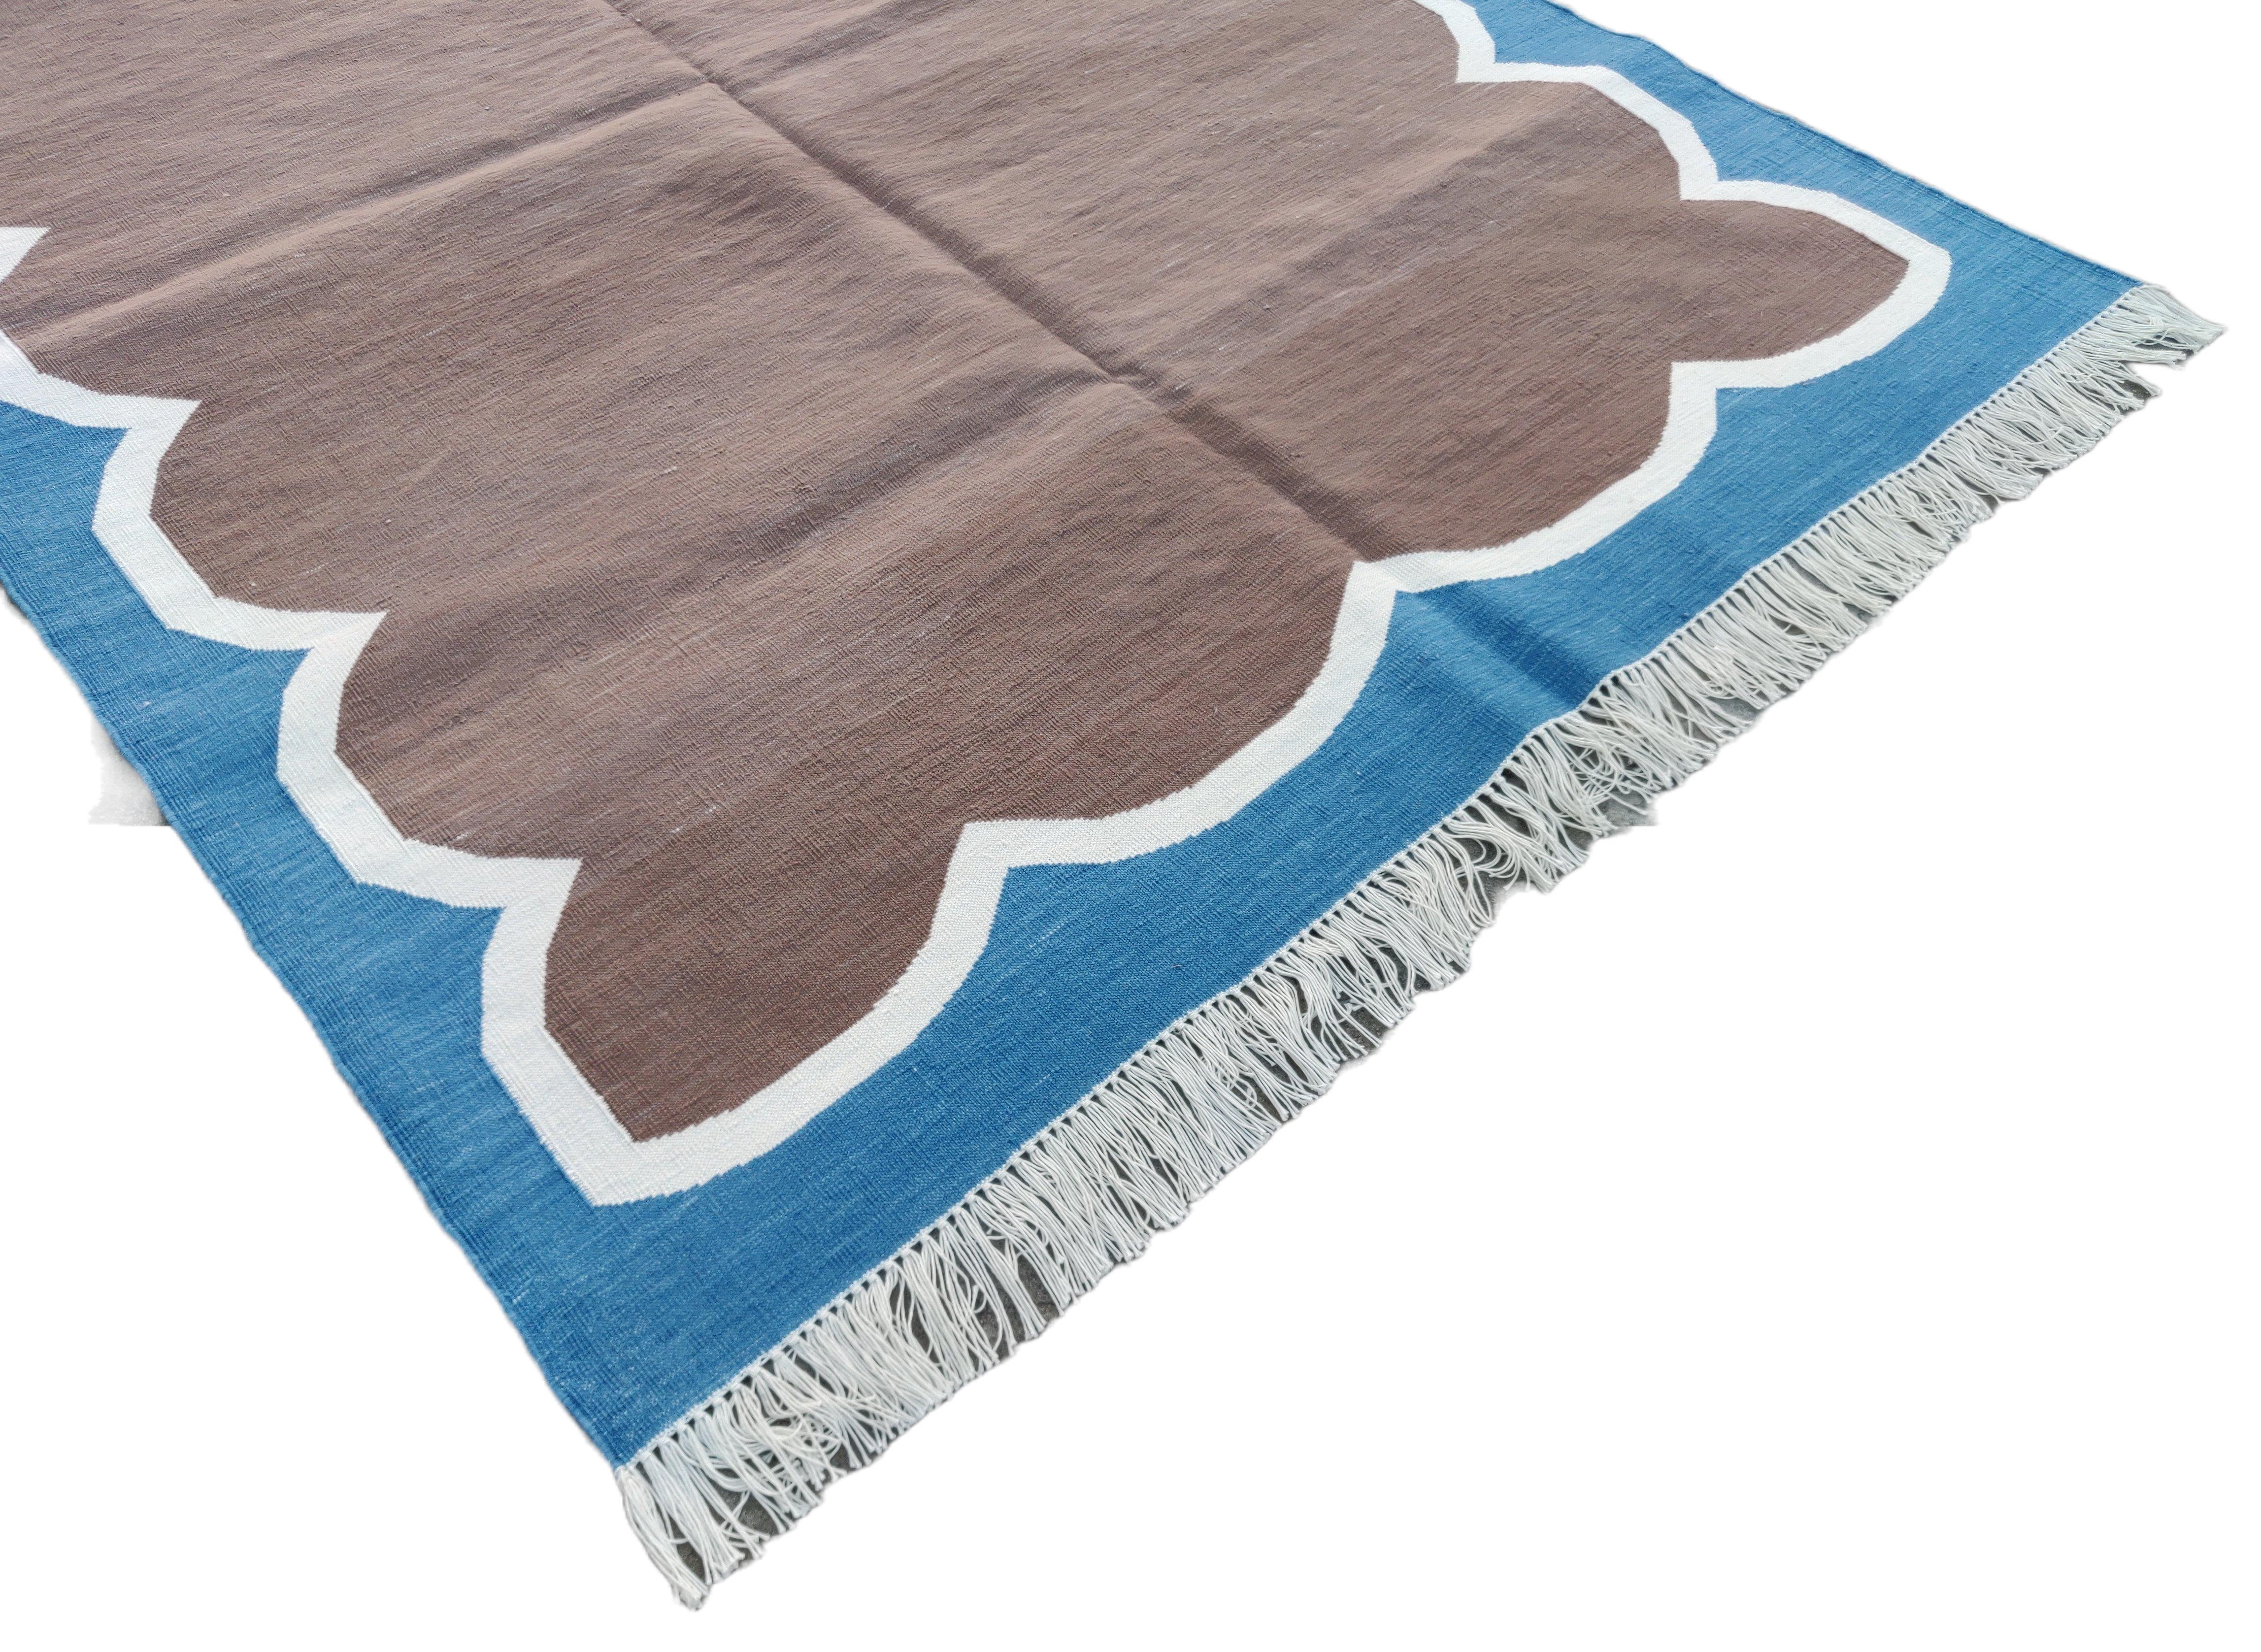 Mid-Century Modern Handmade Cotton Area Flat Weave Rug, 4x6 Brown And Blue Scalloped Indian Dhurrie For Sale